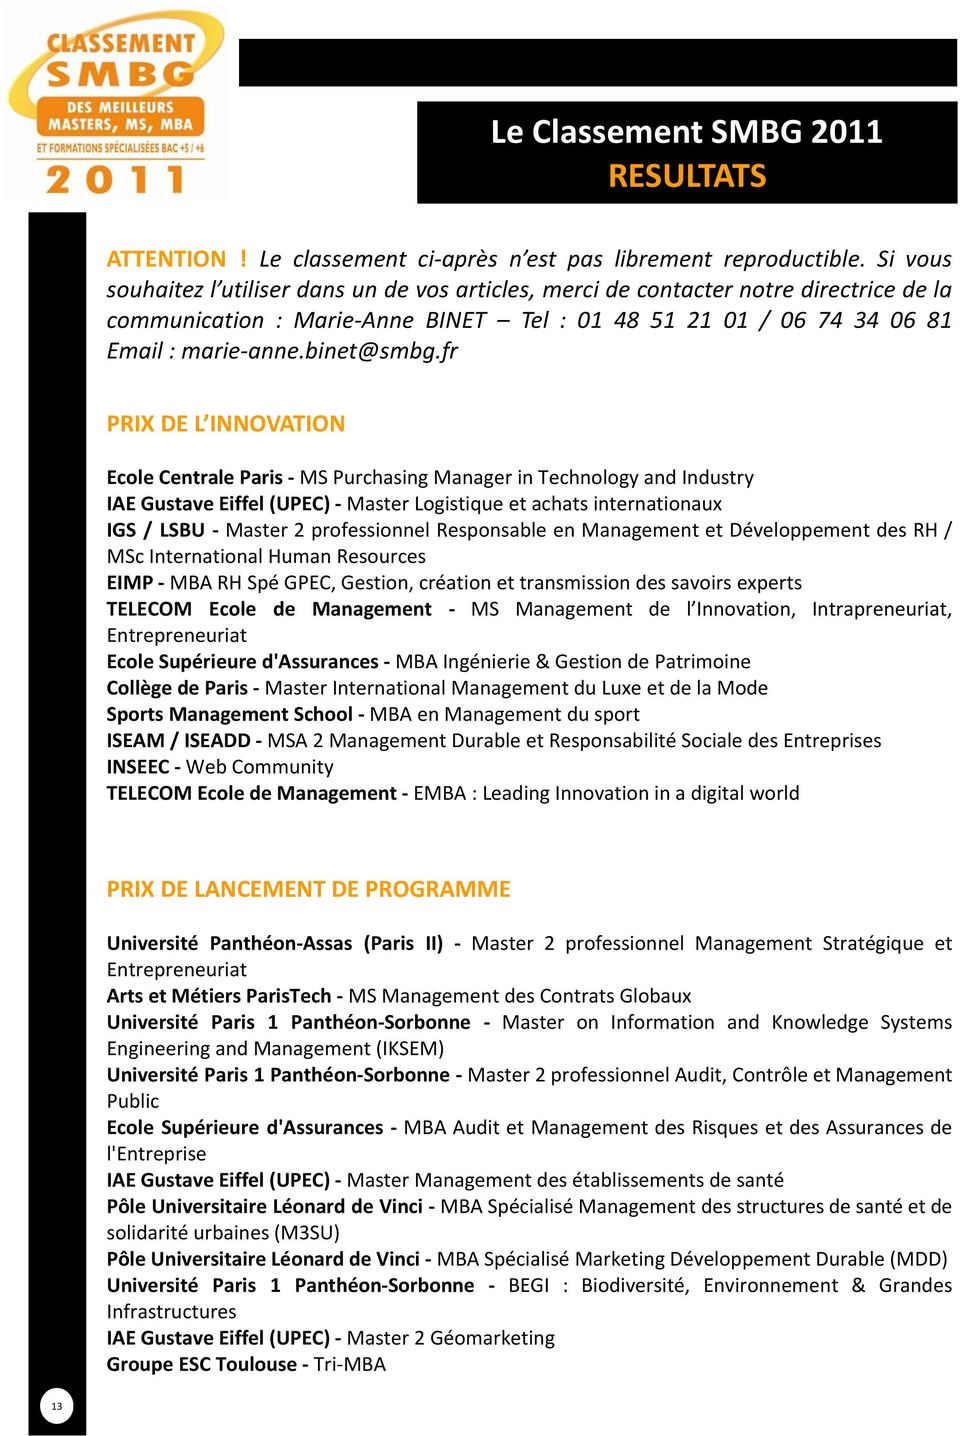 fr PRIX DE L INNOVATION Ecole Centrale Paris MS Purchasing Manager in Technology and Industry IAE Gustave Eiffel (UPEC) Master Logistique et achats internationaux IGS / LSBU Master 2 professionnel